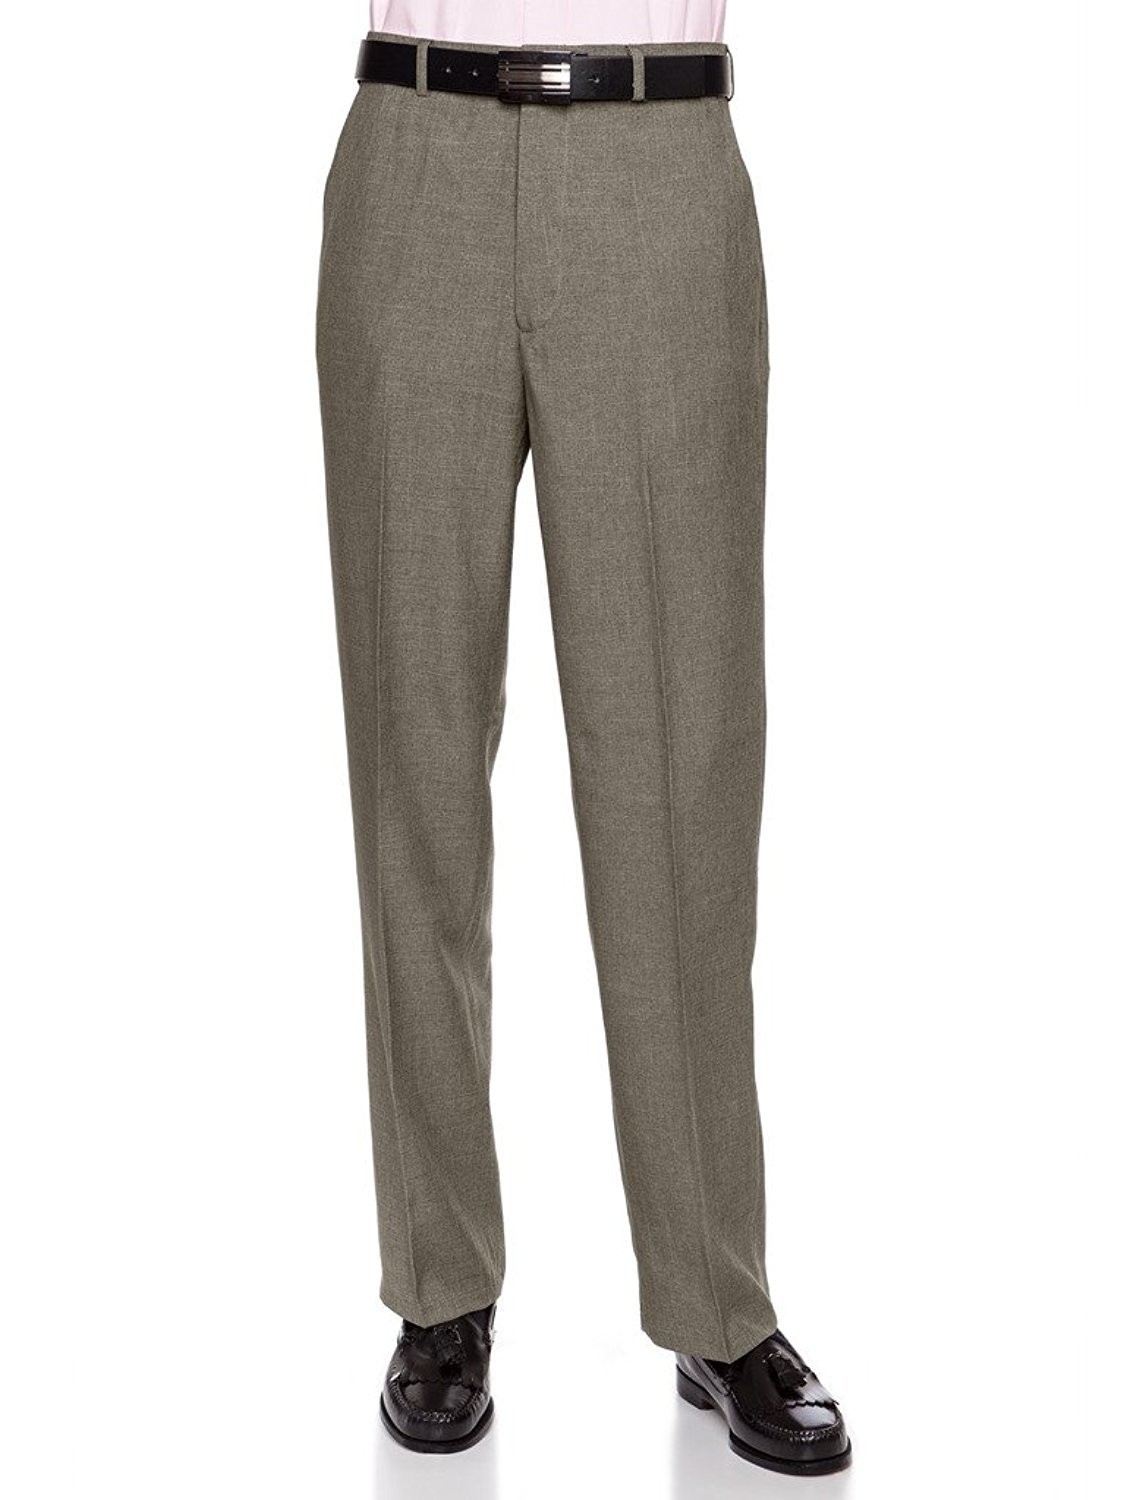 Perfect for Every Day! RGM Mens Flat Front Dress Pant Modern Fit